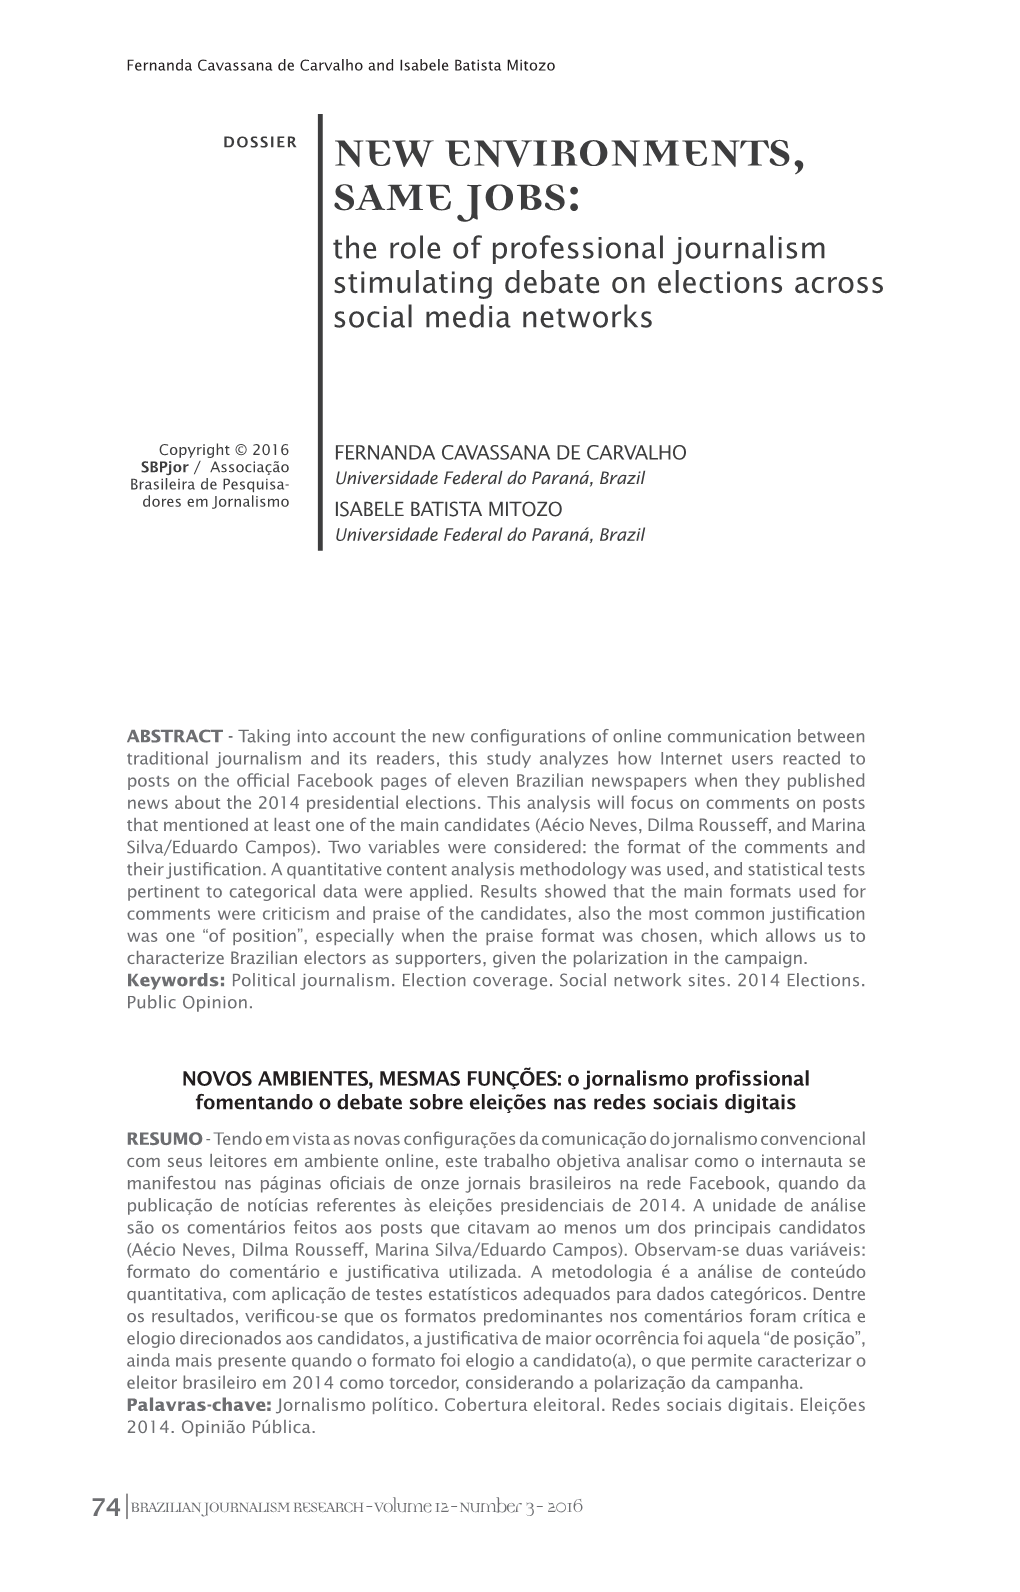 NEW ENVIRONMENTS, SAME JOBS: the Role of Professional Journalism Stimulating Debate on Elections Across Social Media Networks